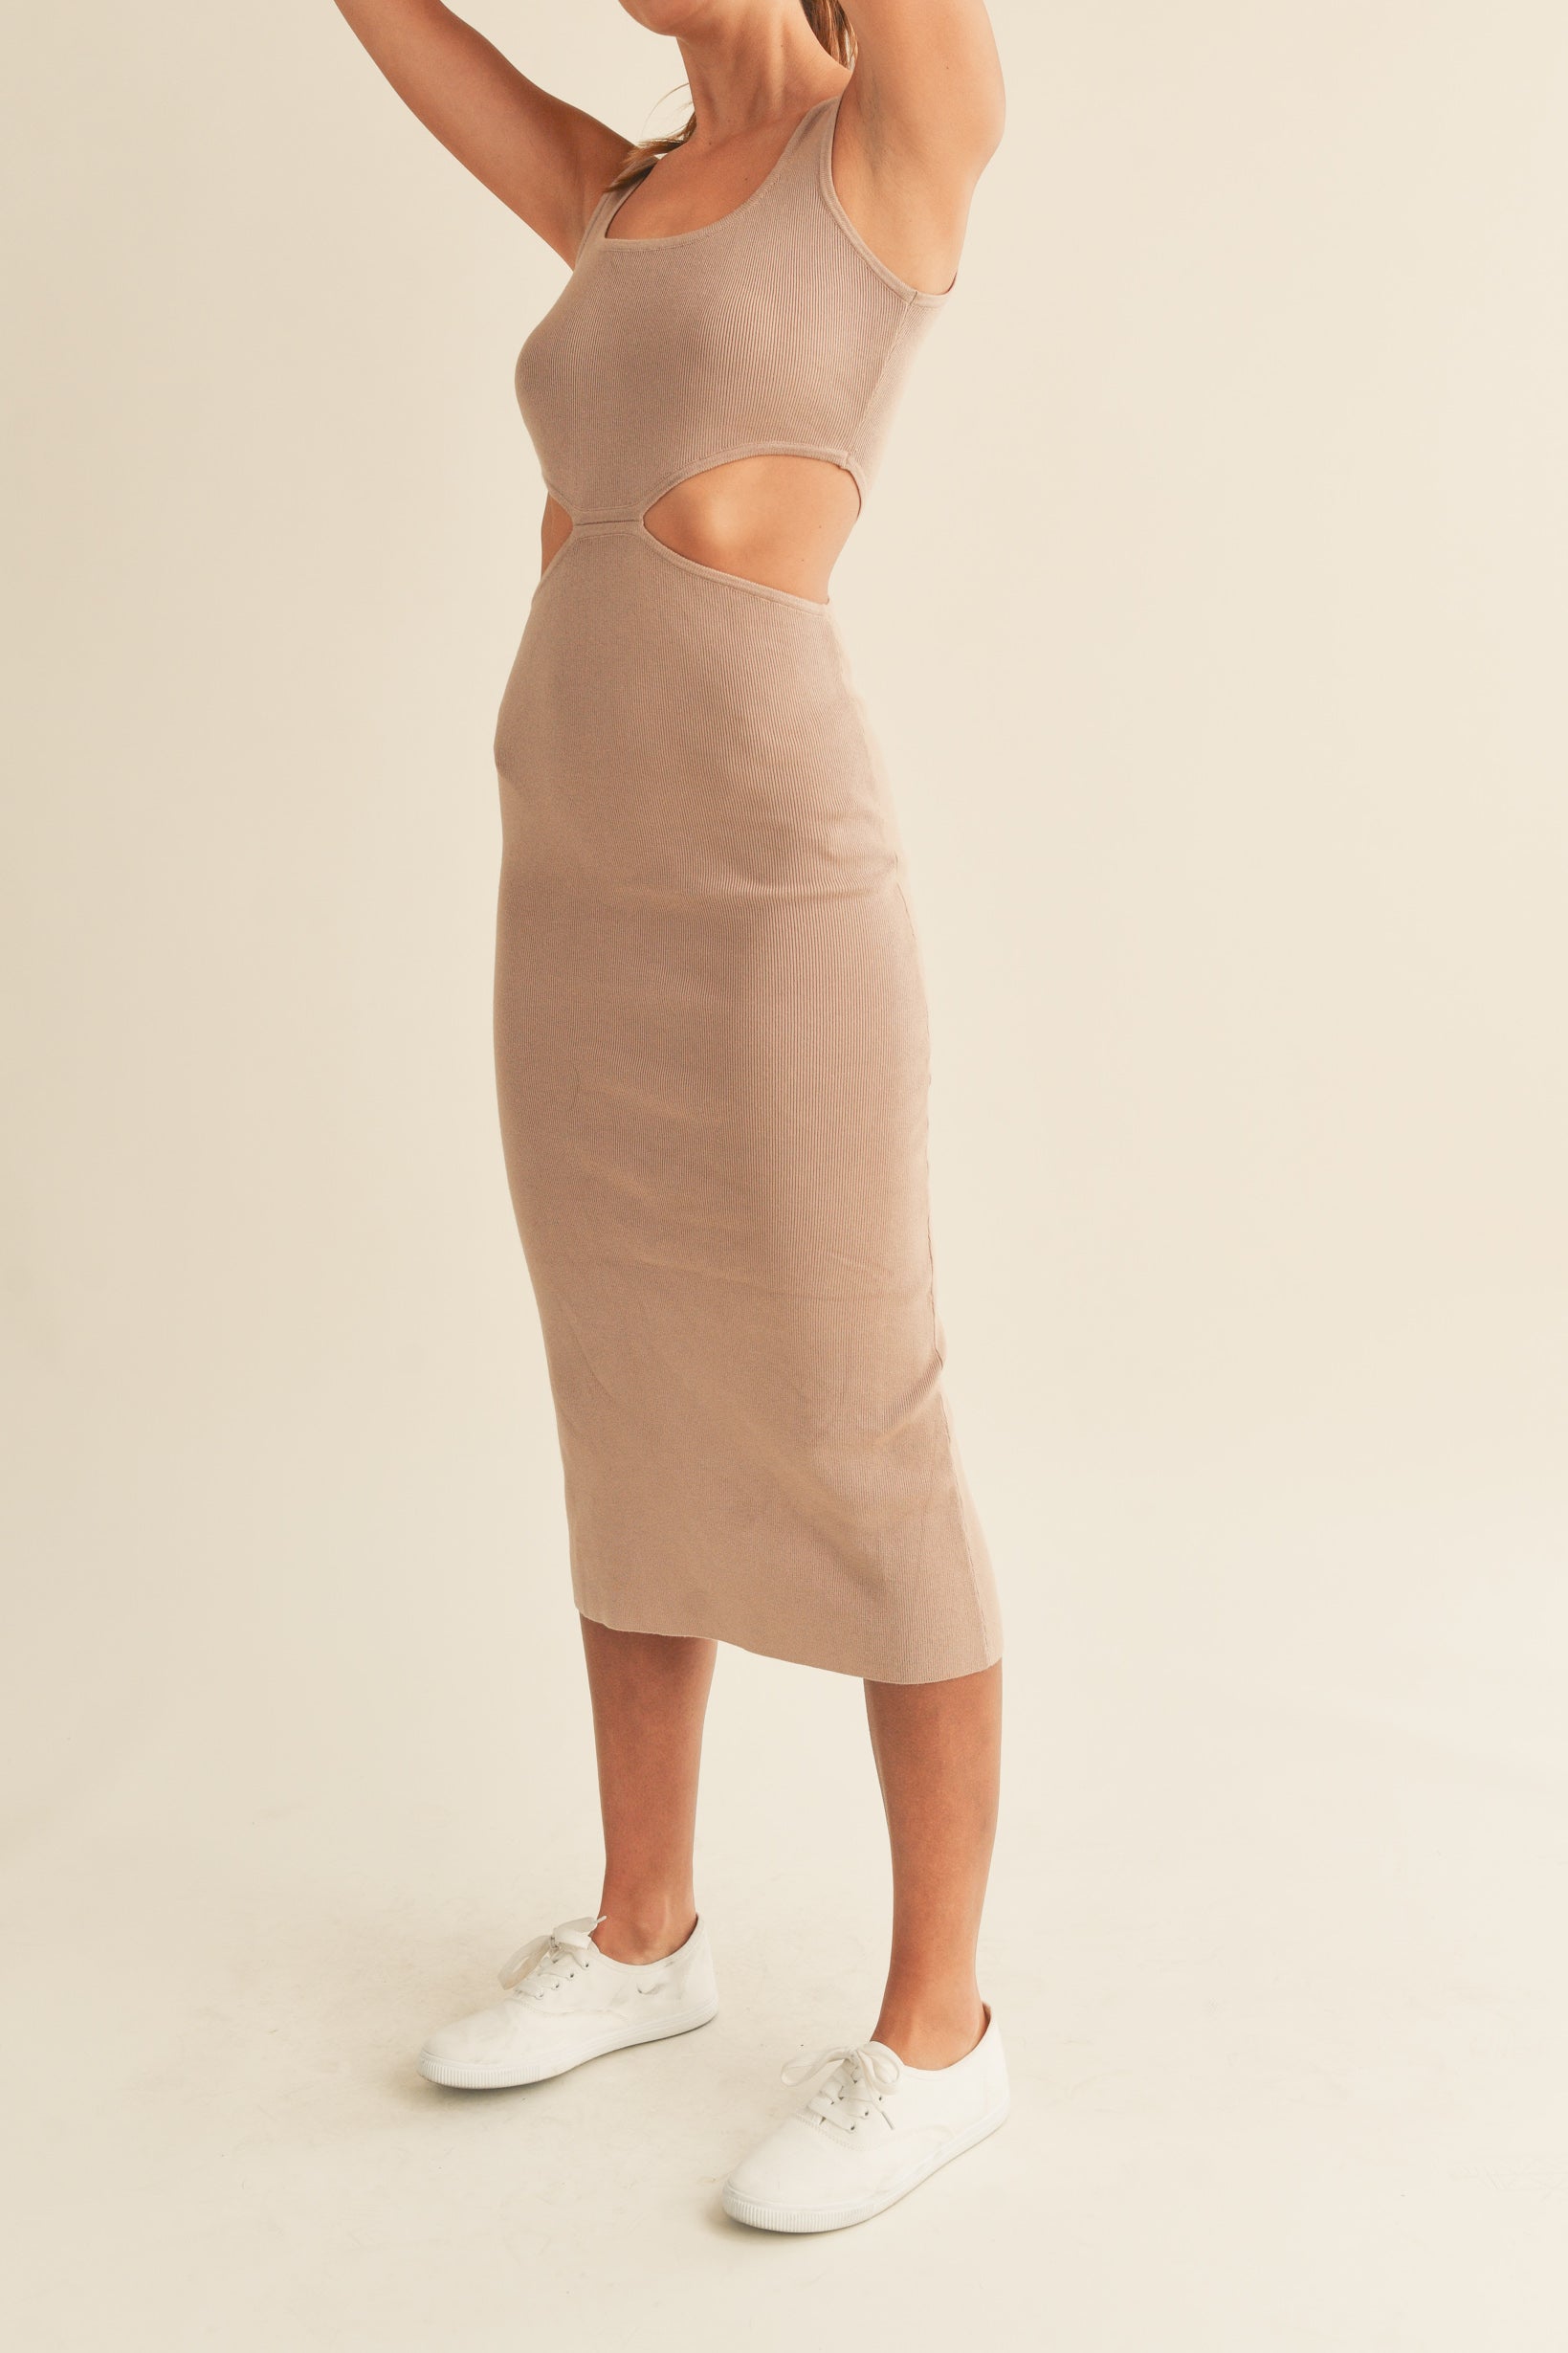 Knit sleeveless midi dress in mocha features side cut outs and a tank-style top.   Side view.